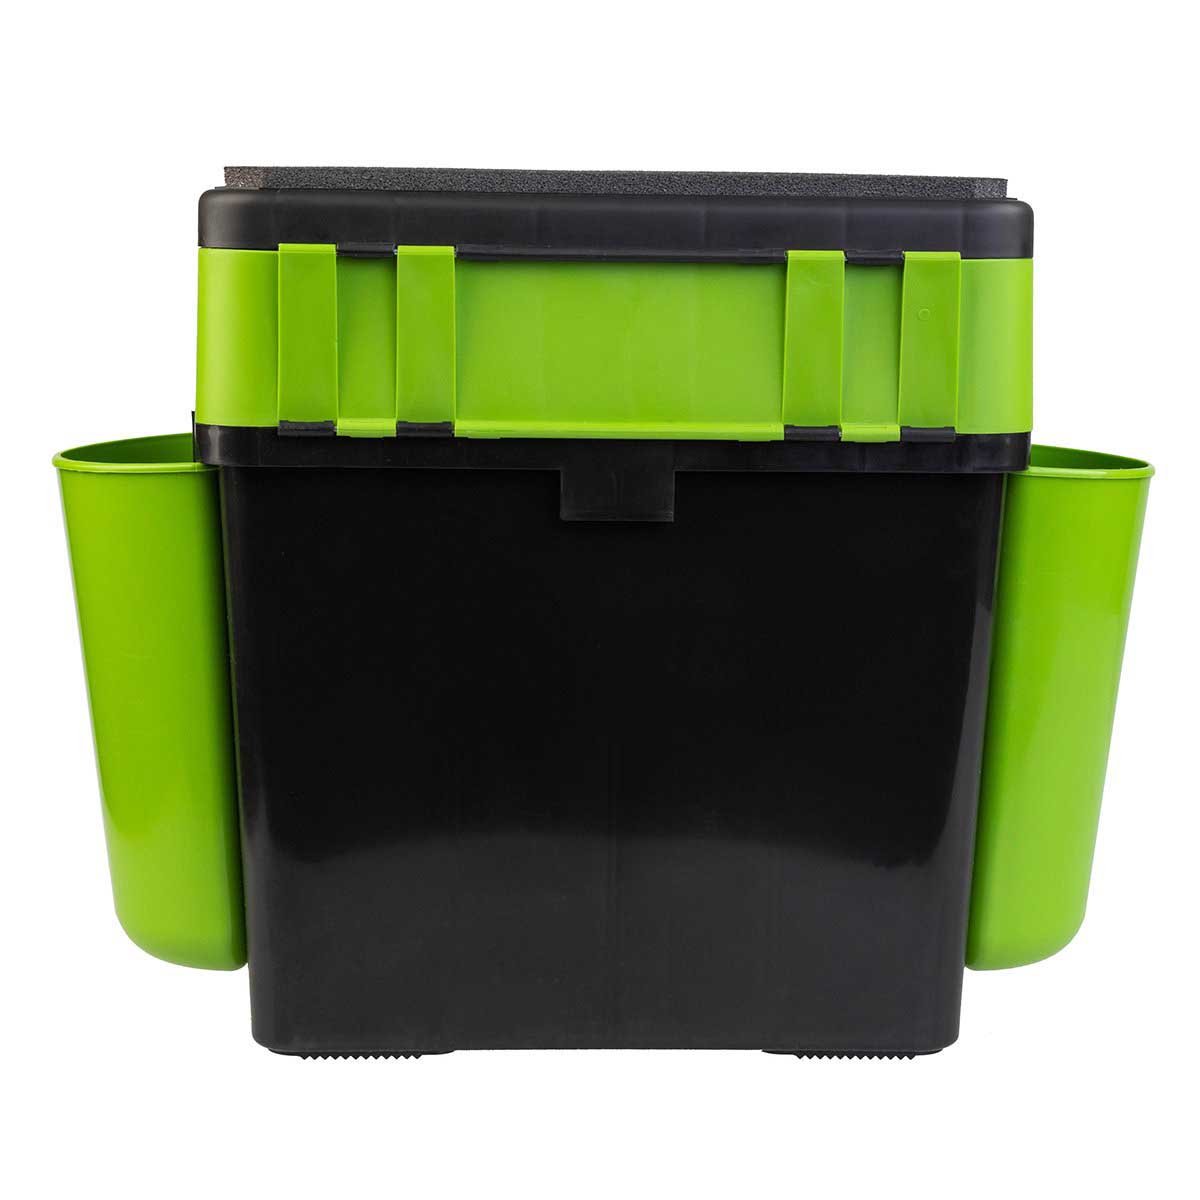 FishBox Large 5 gal Box for Ice Fishing, 2 Compartments, Green